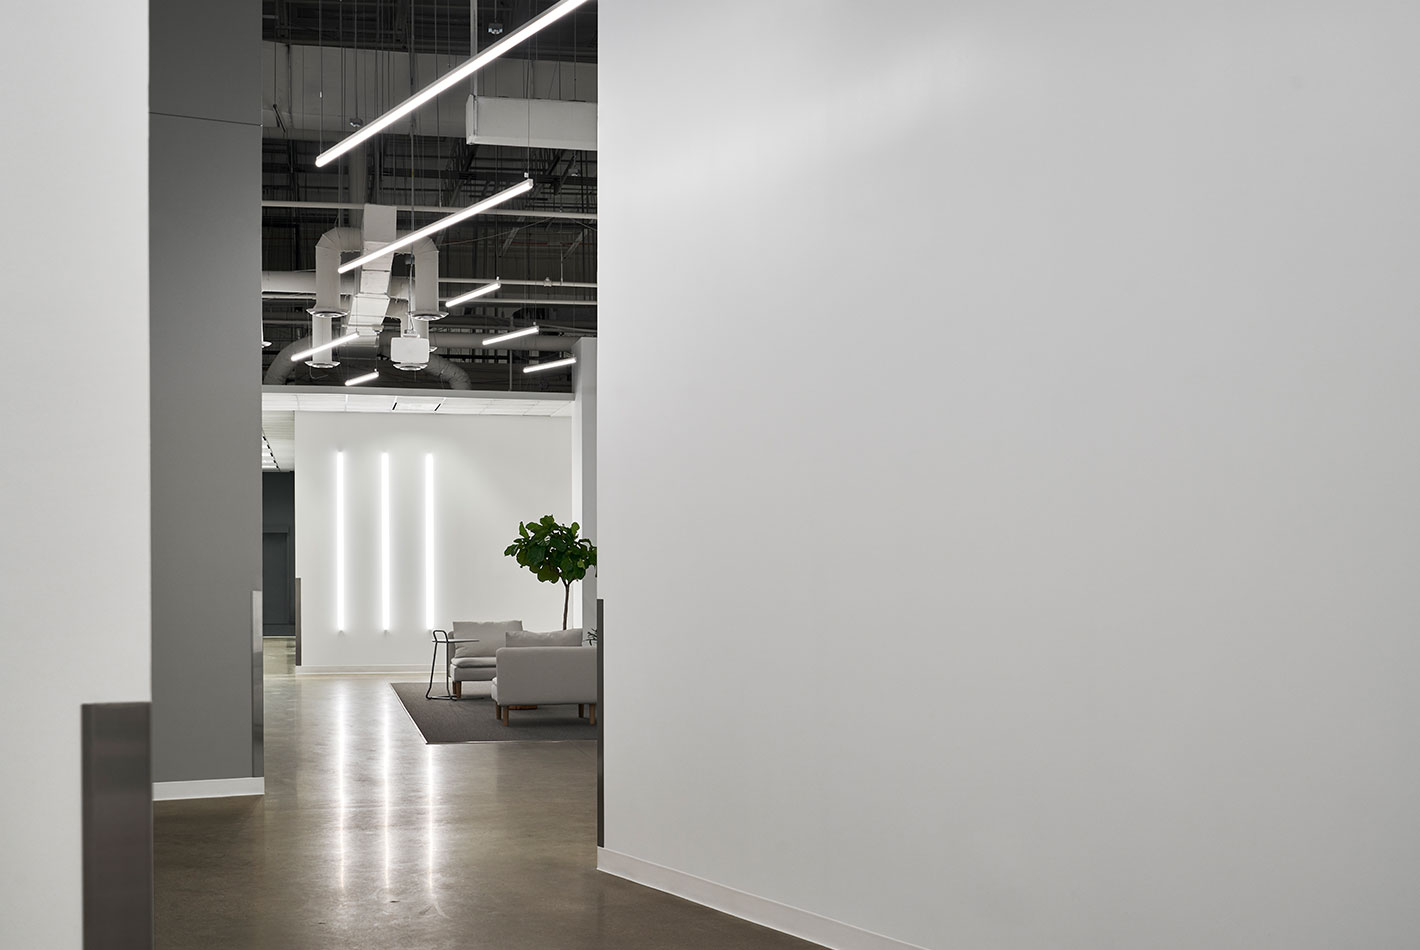 Polished concrete floors, industrial duct work, and gleaming white walls create a transitional hallway at Postmates headquarters.